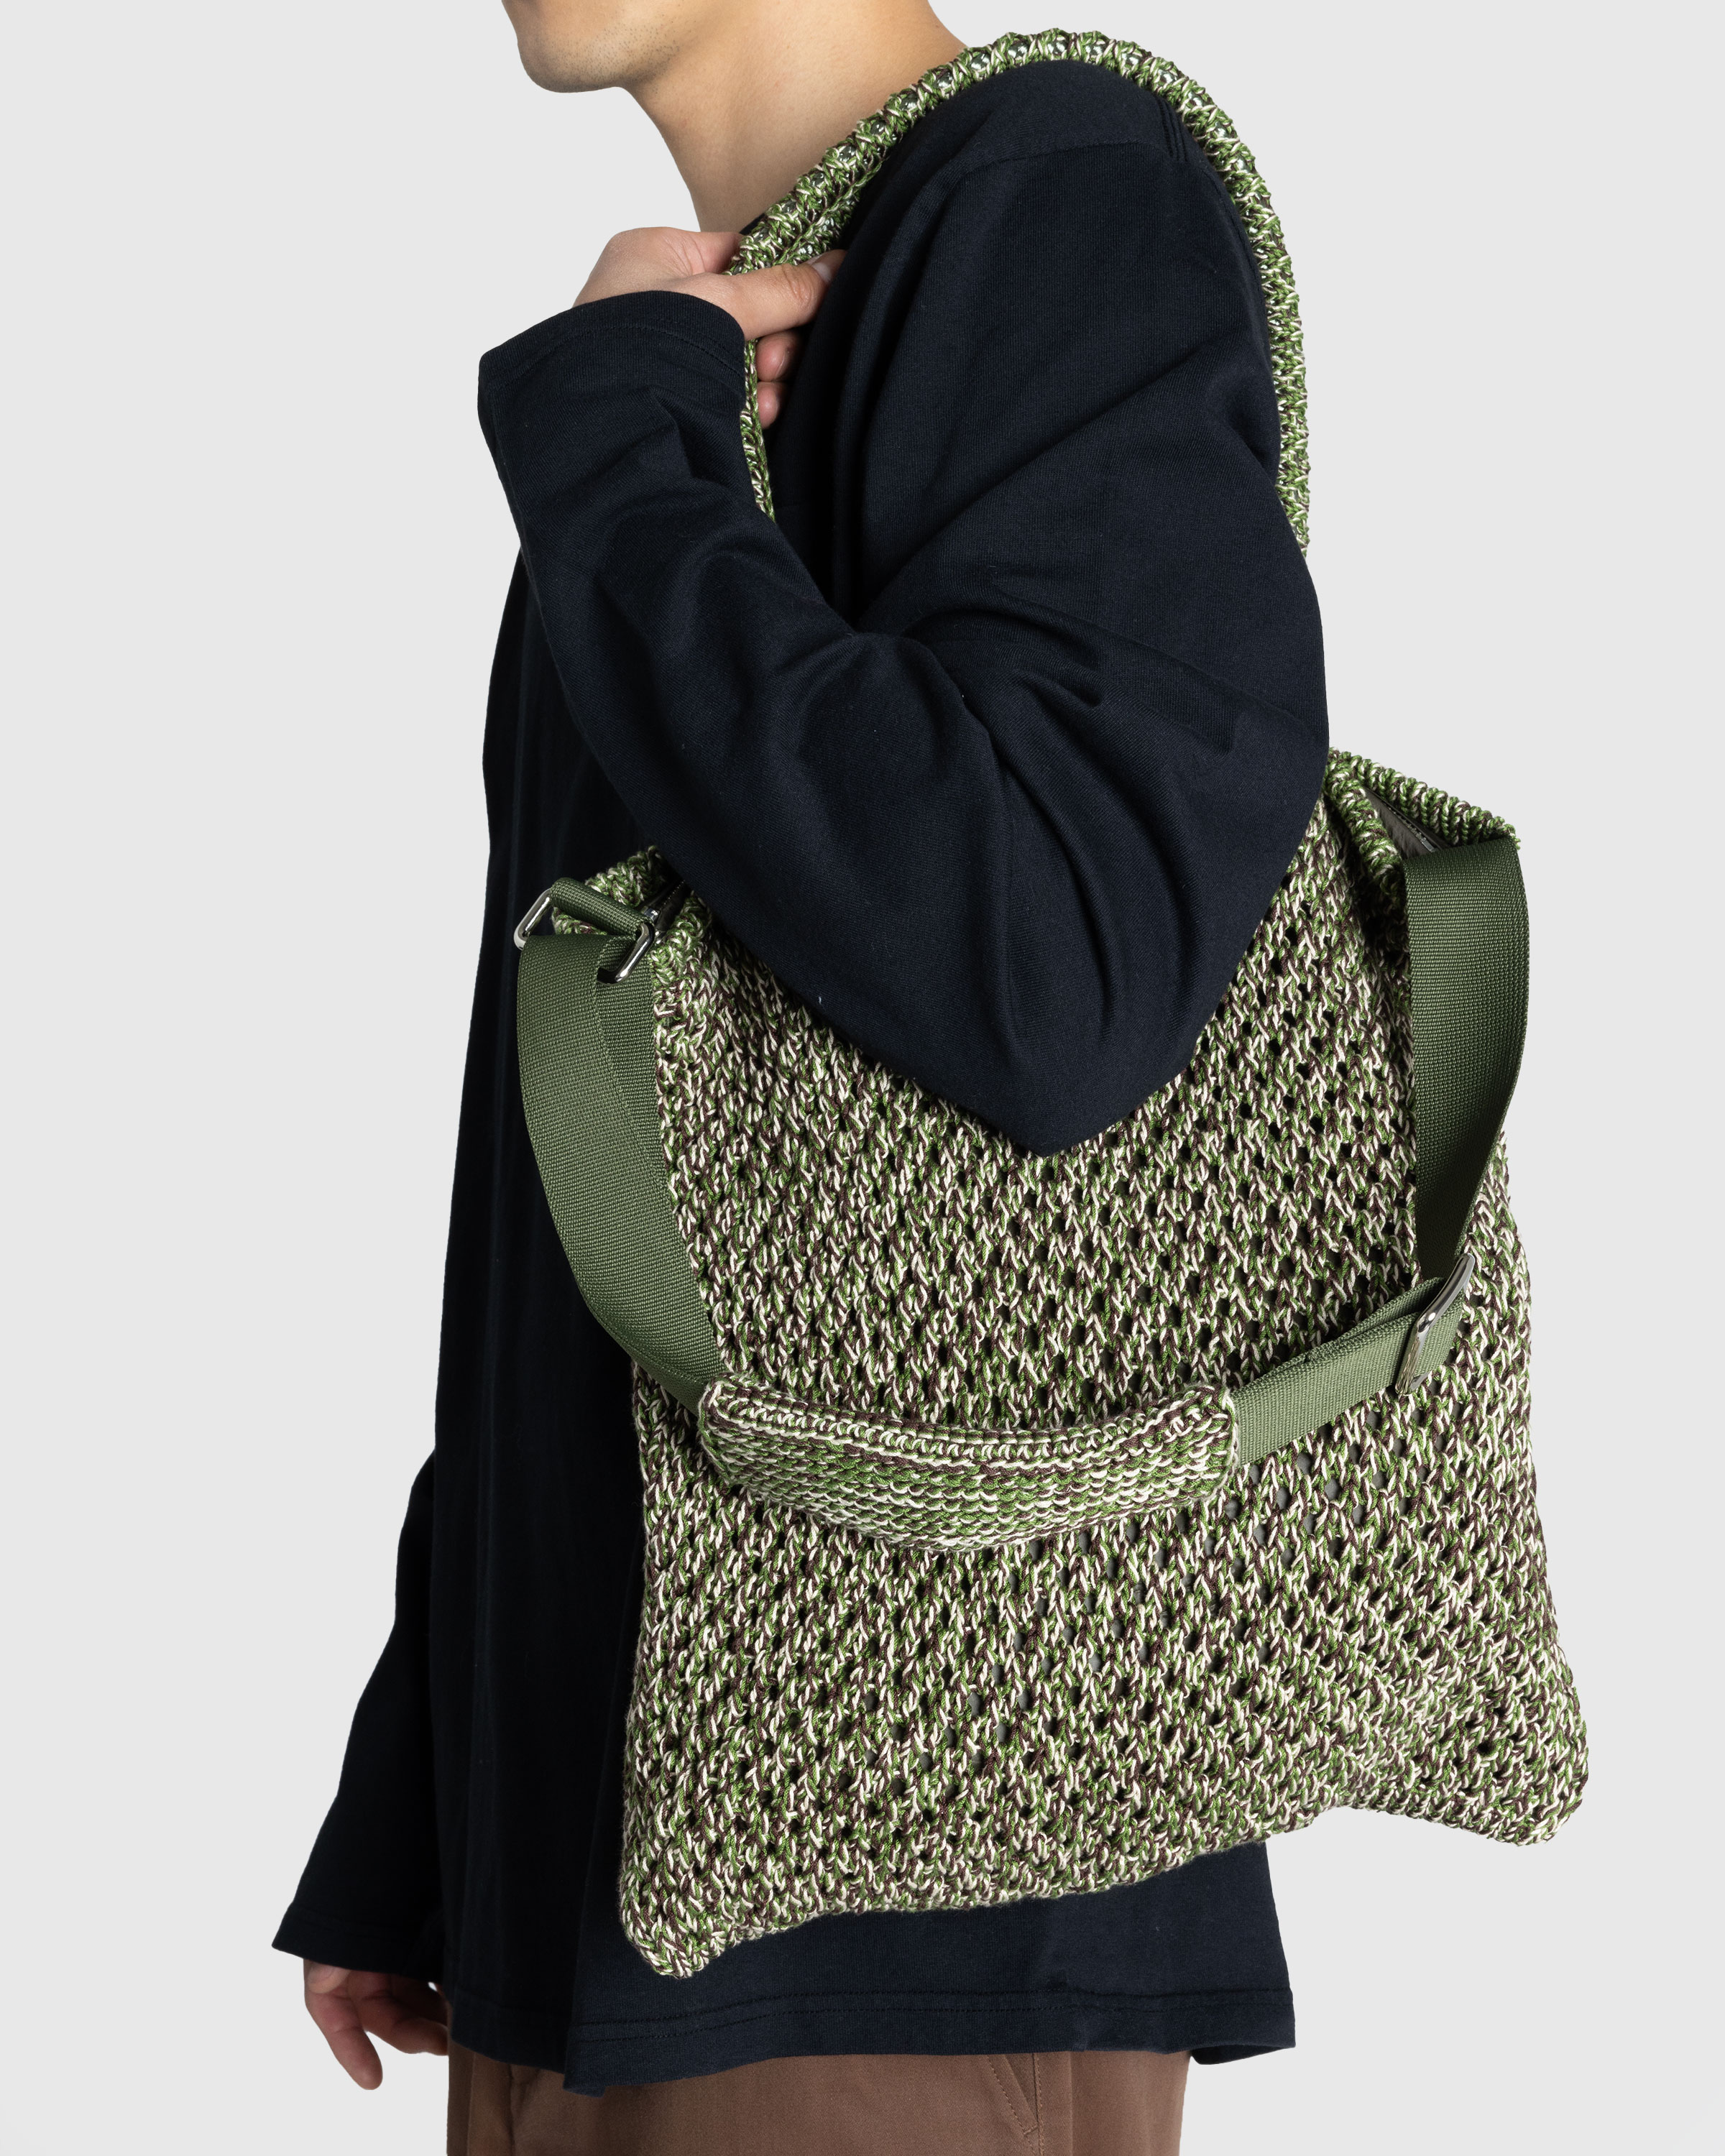 SSU – Knitted Mesh Work Tote Classic Camo - Tote Bags - Green - Image 2